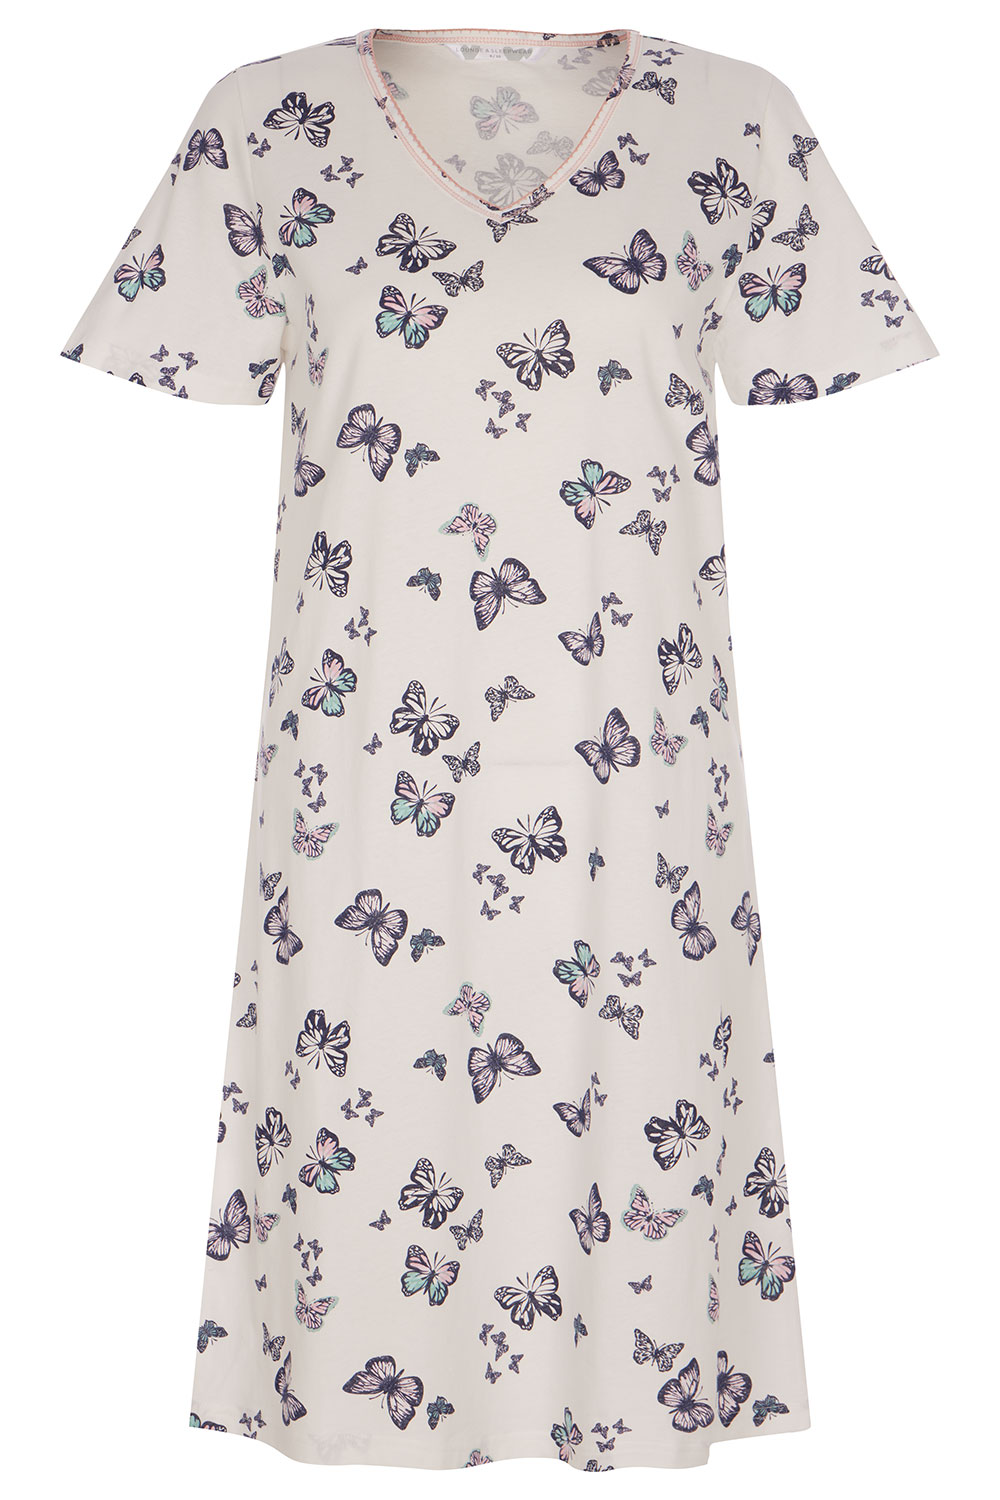 Short Sleeve All Over Butterfly Print Nightdress | Bonmarché